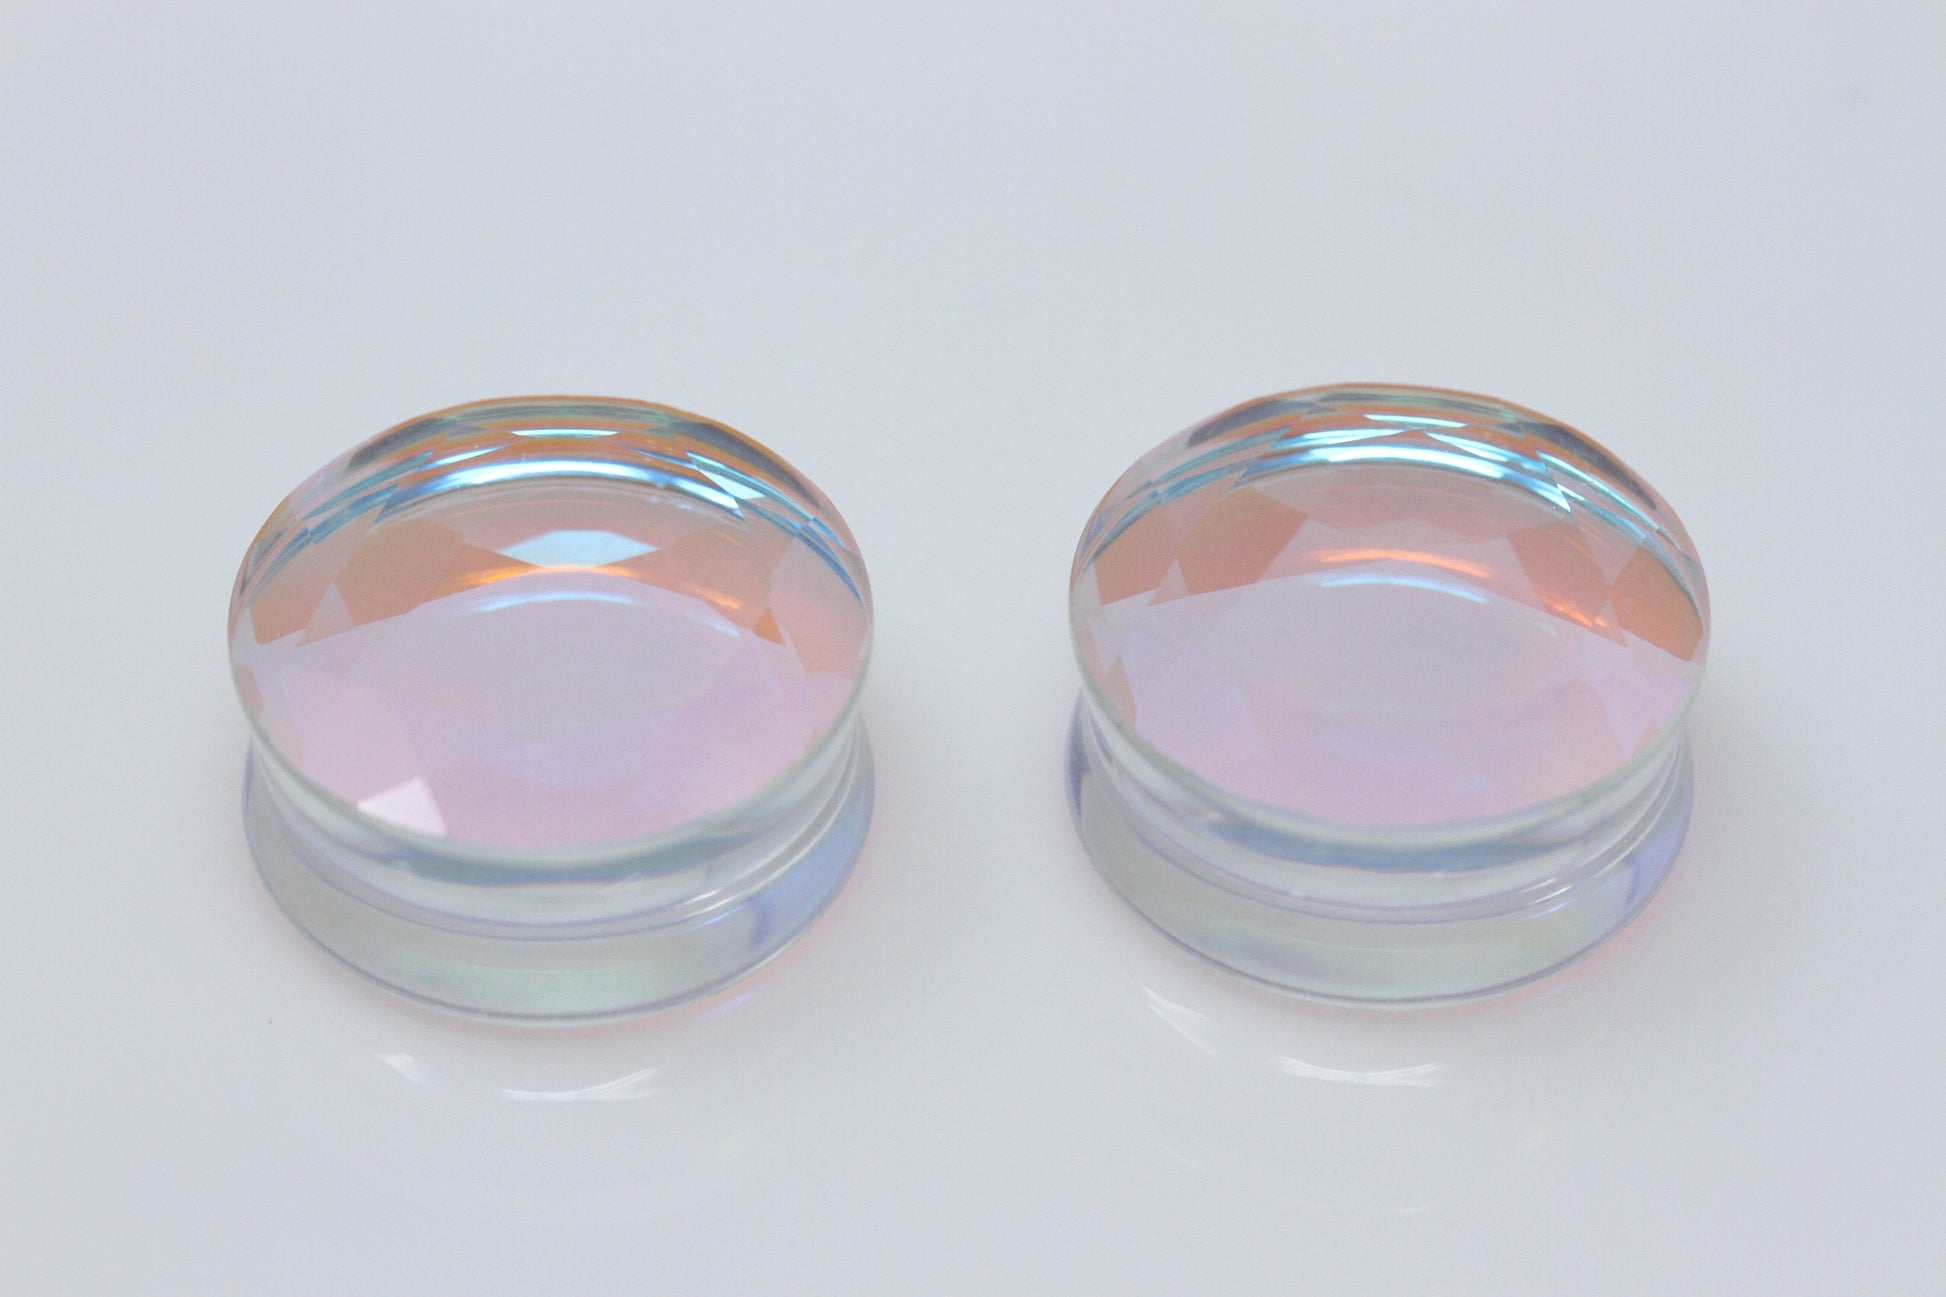 Holographic Faceted Plugs - Pair 4